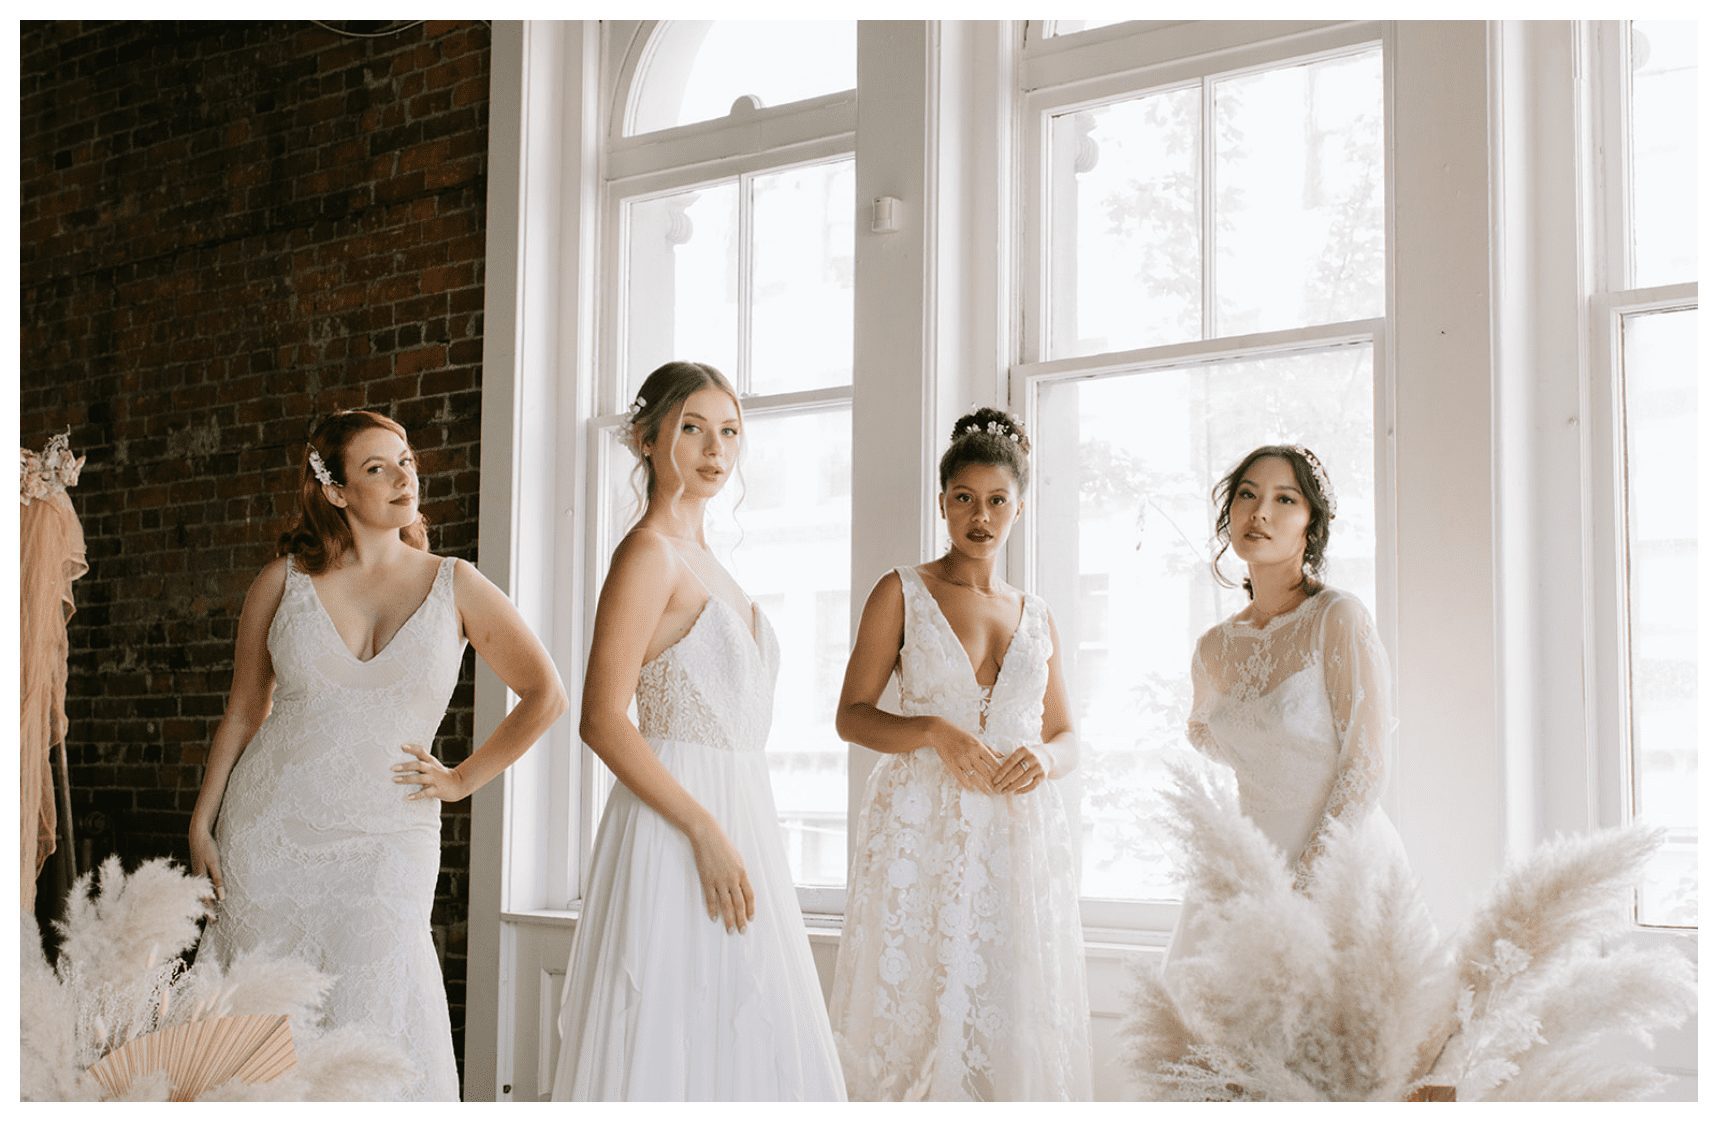 four brides modelling wedding dresses and accessories